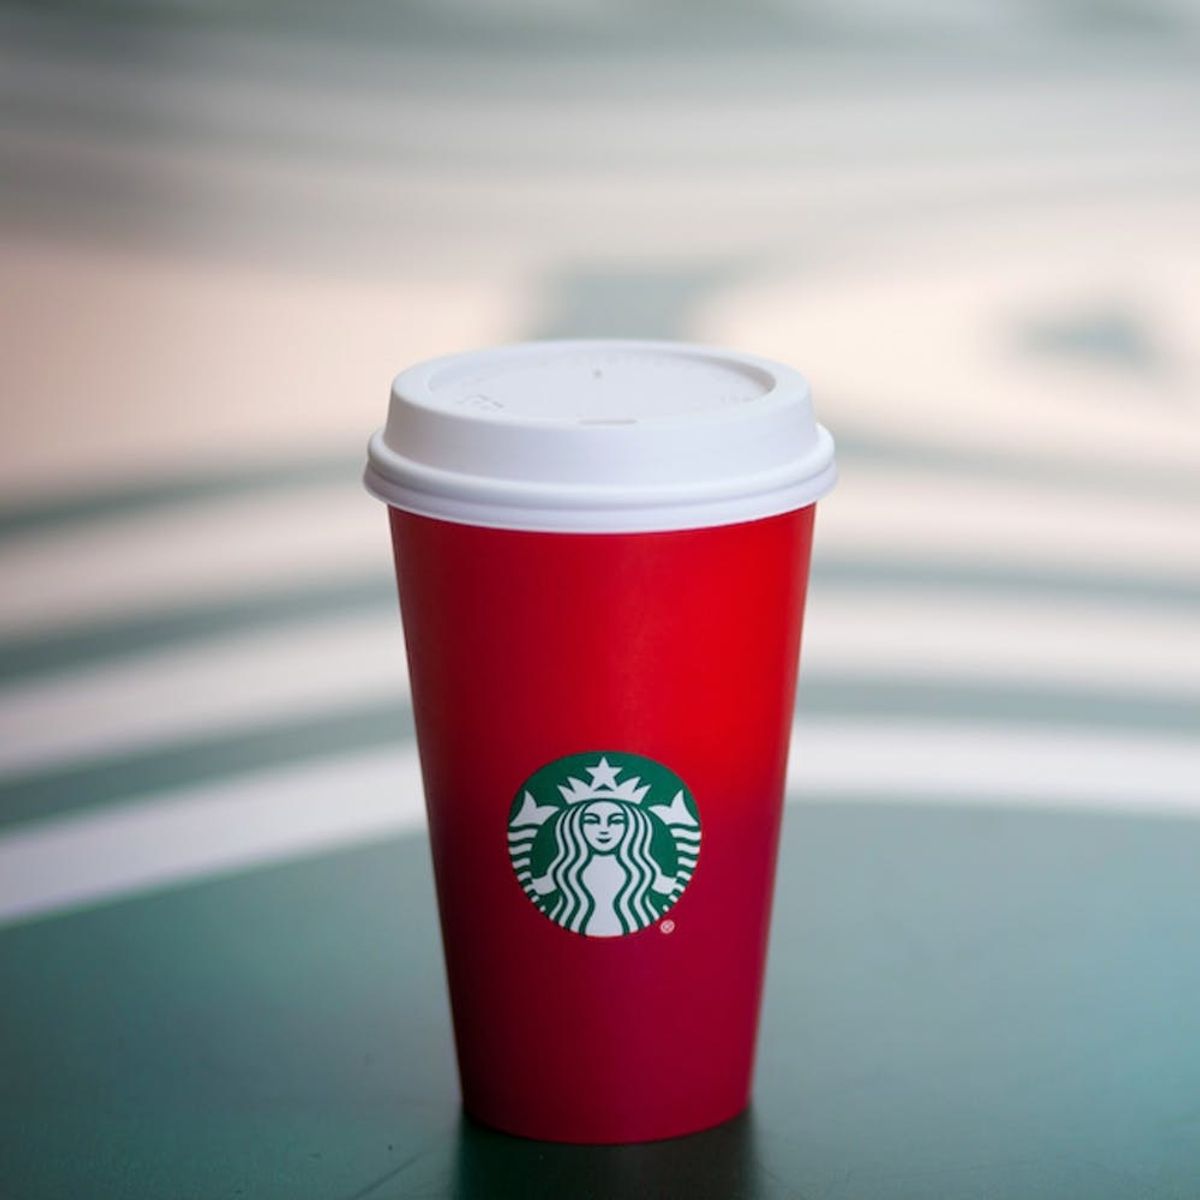 Starbucks Just Added a Delicious New Holiday Drink You’ve Never Had Before